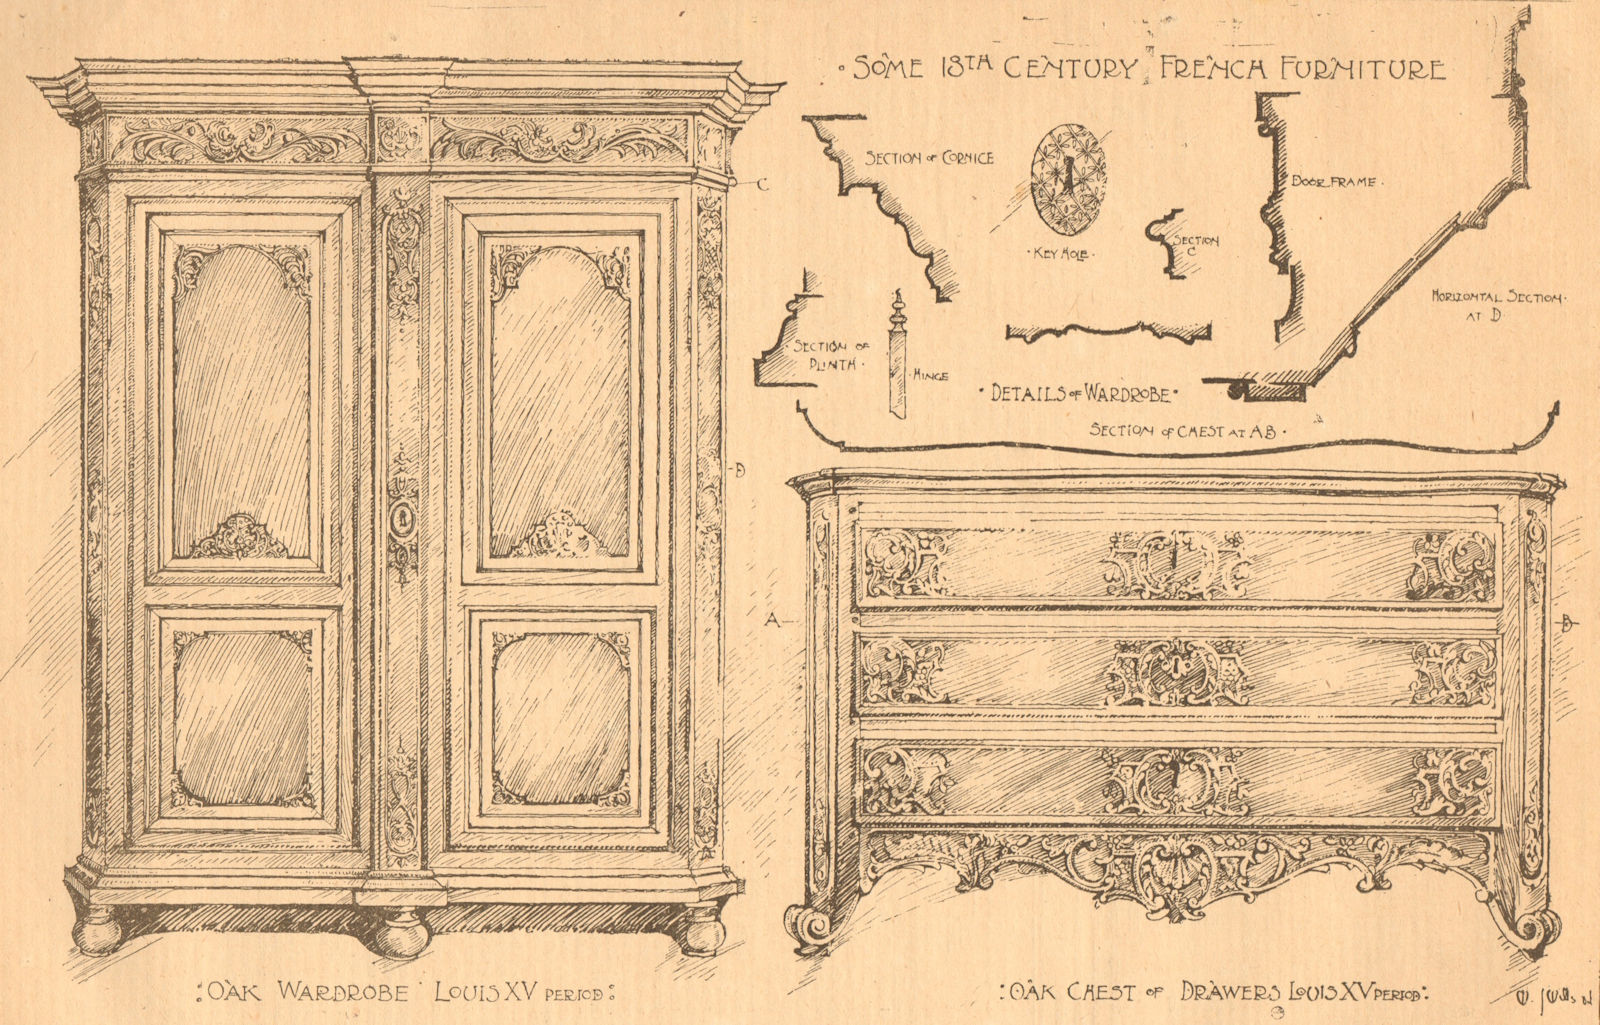 Associate Product 18th century French furniture. Oak wardrobe Louis XV chest of drawers 1900